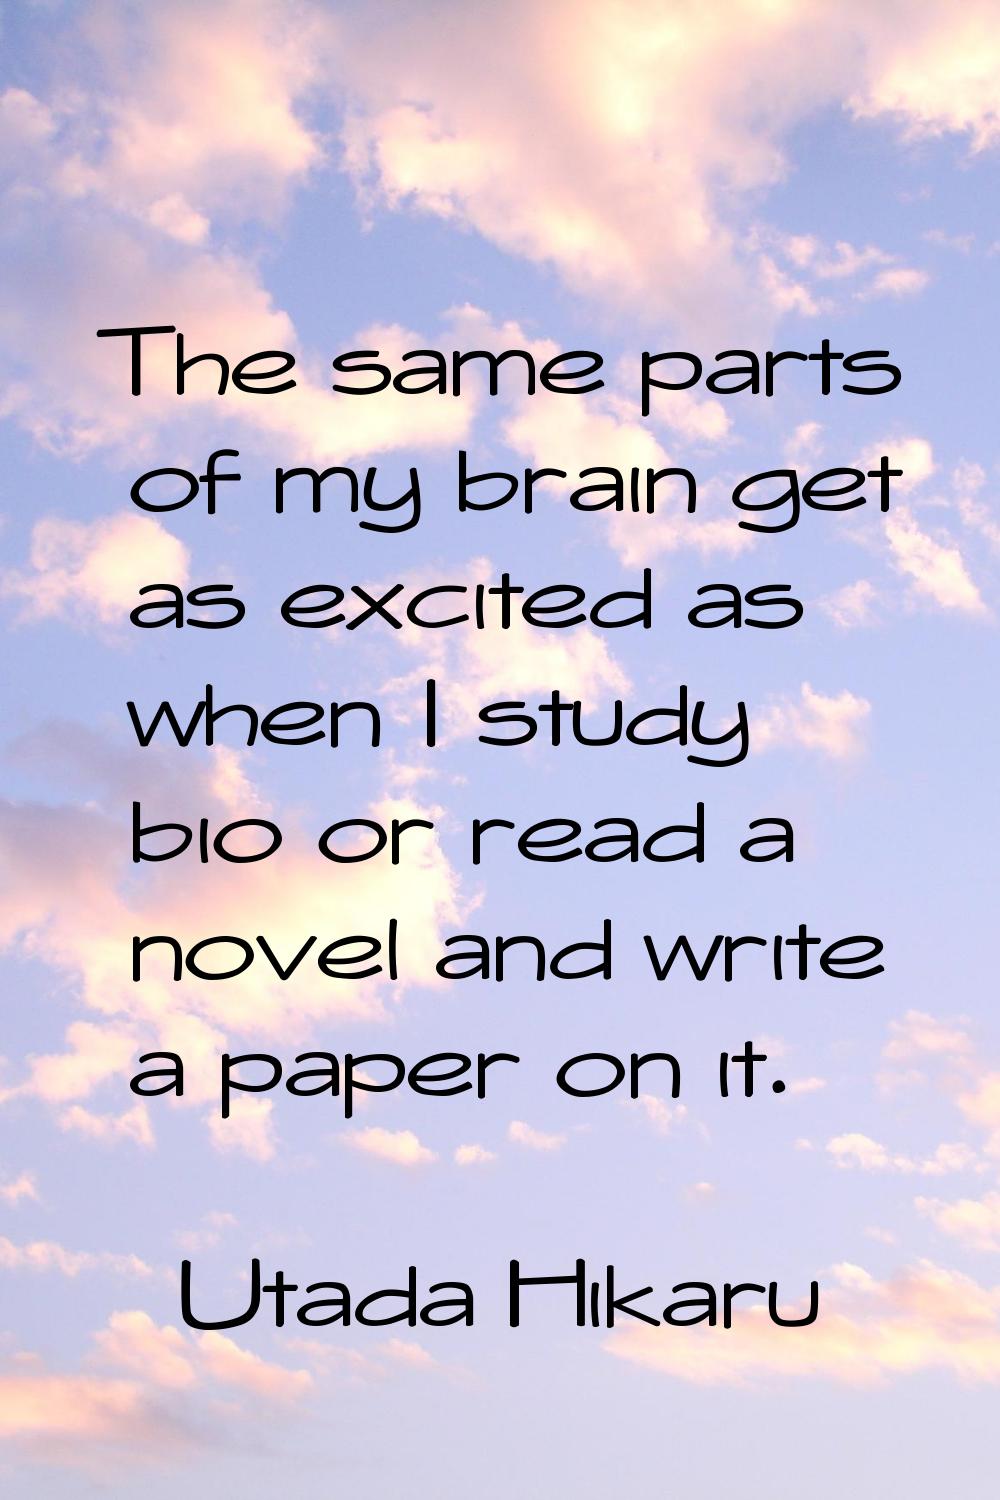 The same parts of my brain get as excited as when I study bio or read a novel and write a paper on 